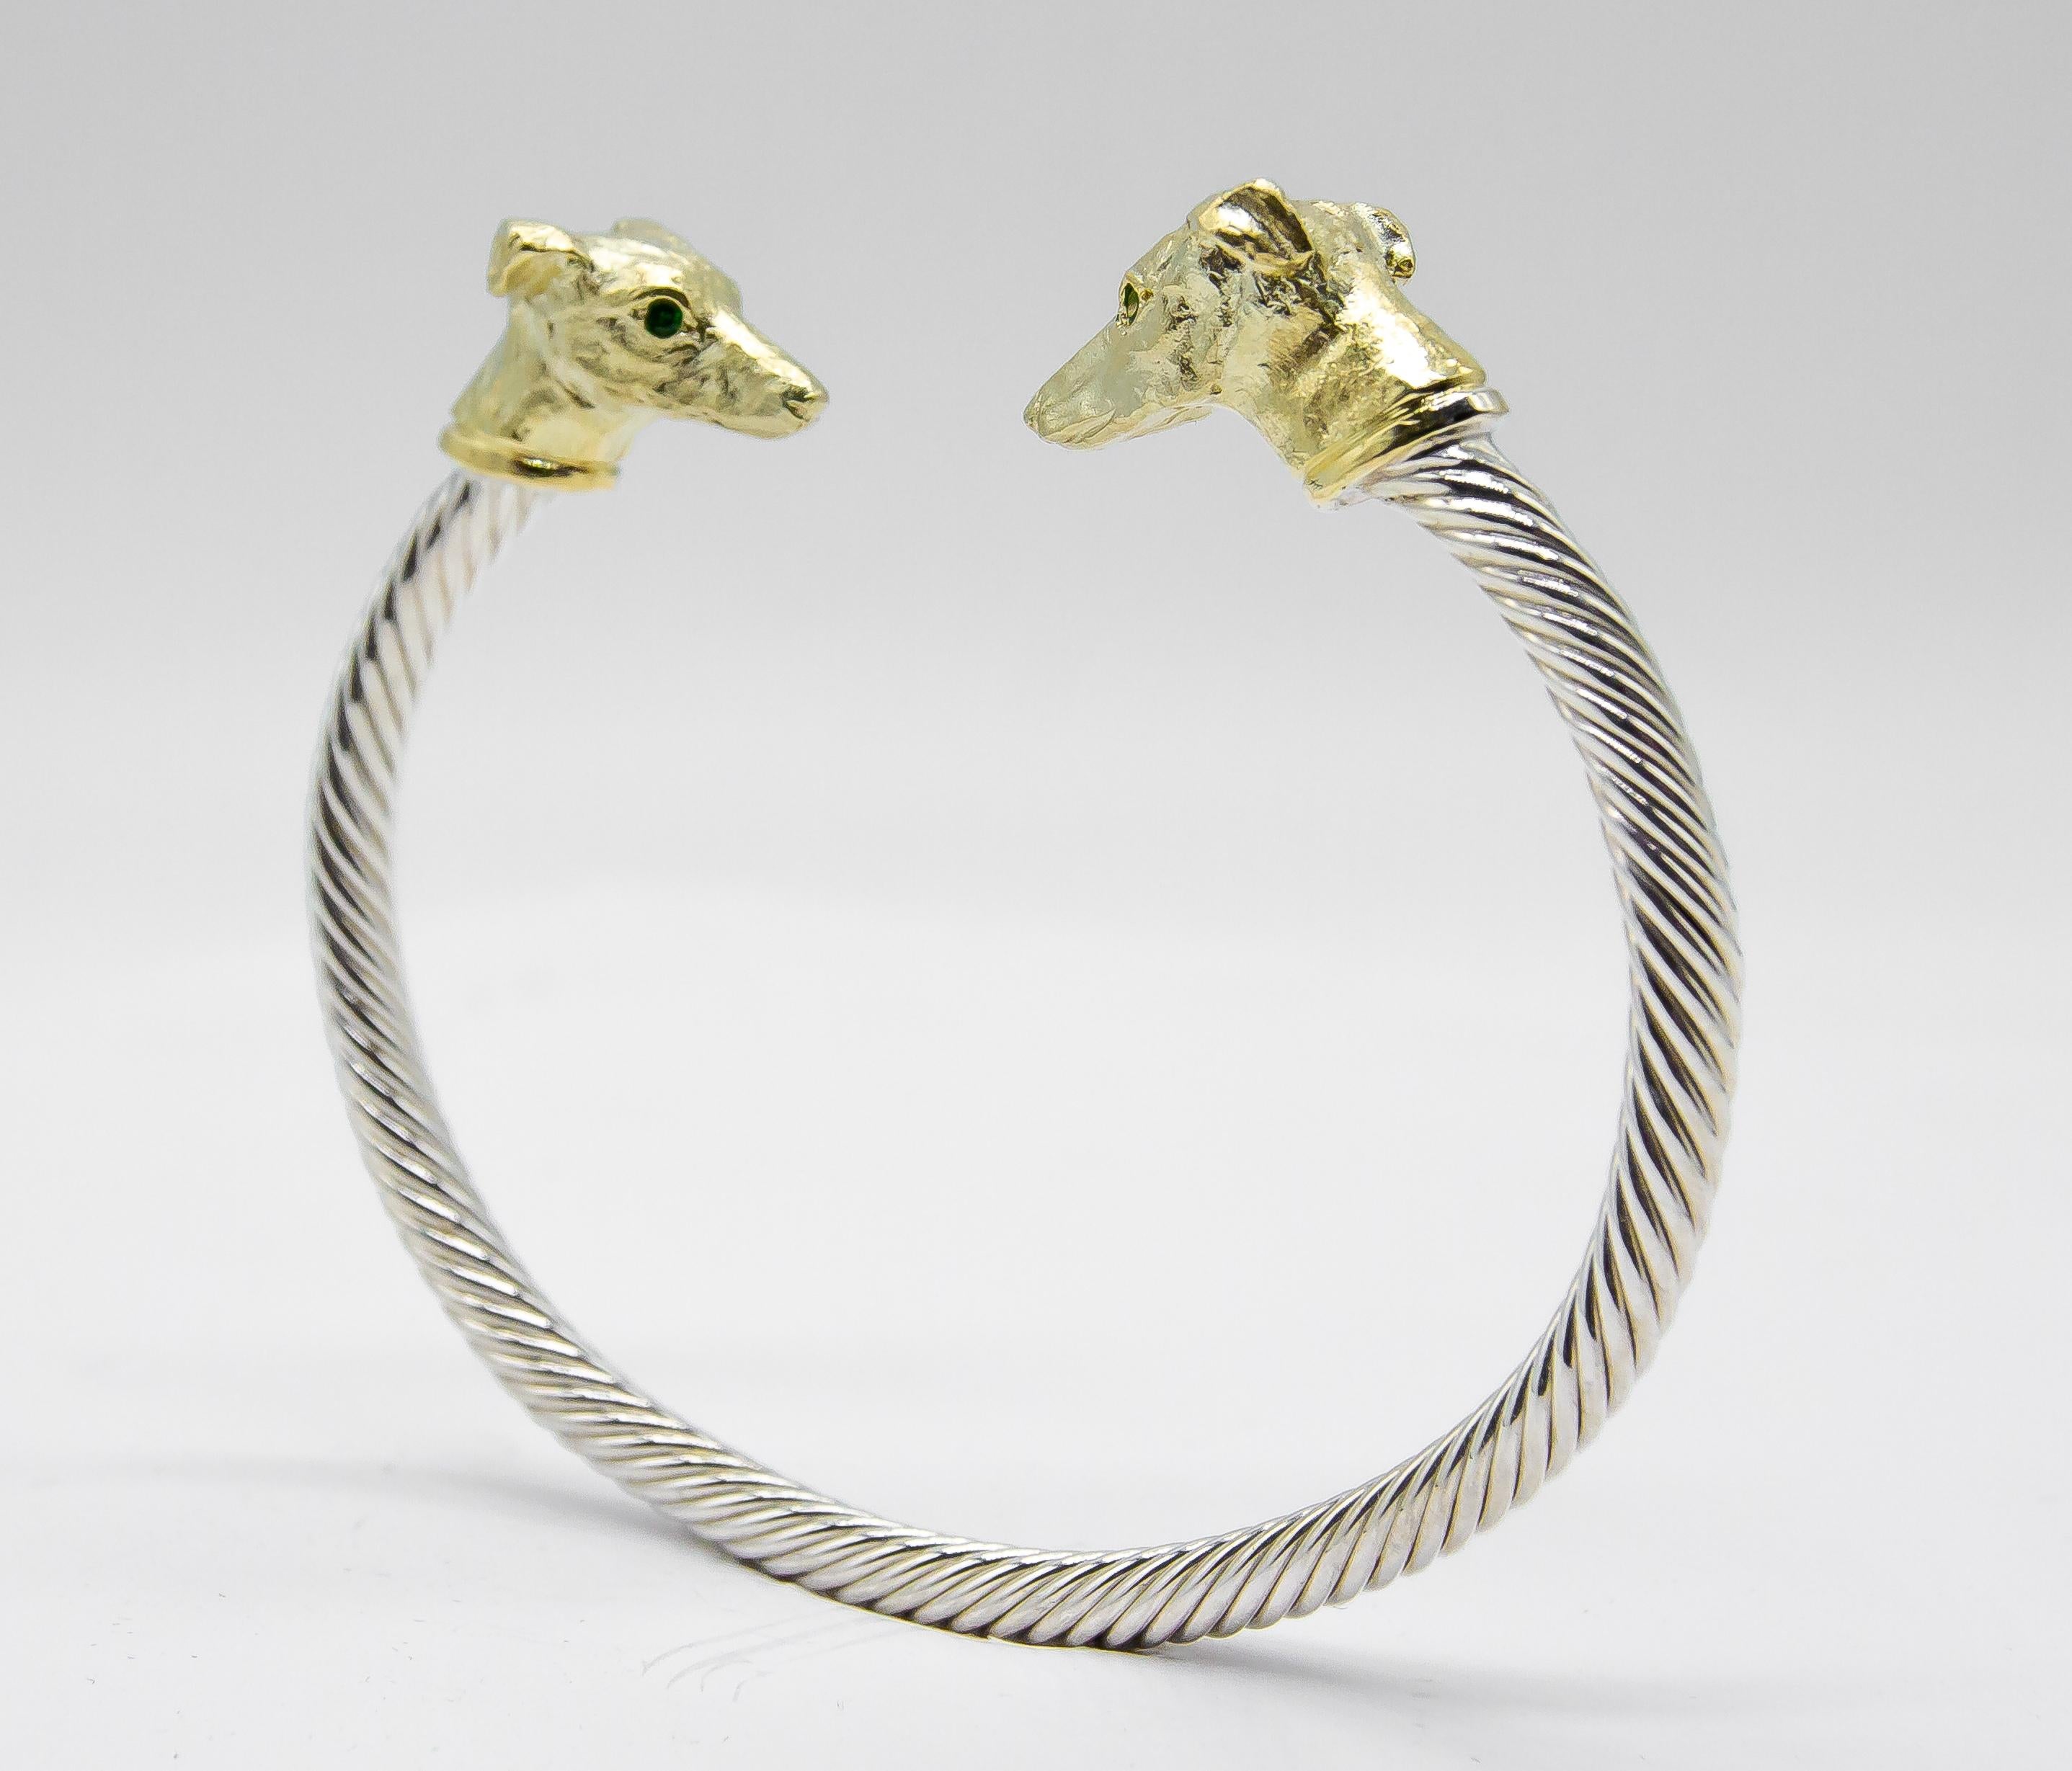 Artist Paul Eaton Sculpted Greyhound Heads on Sterling Silver Twisted Bangle Bracelet For Sale